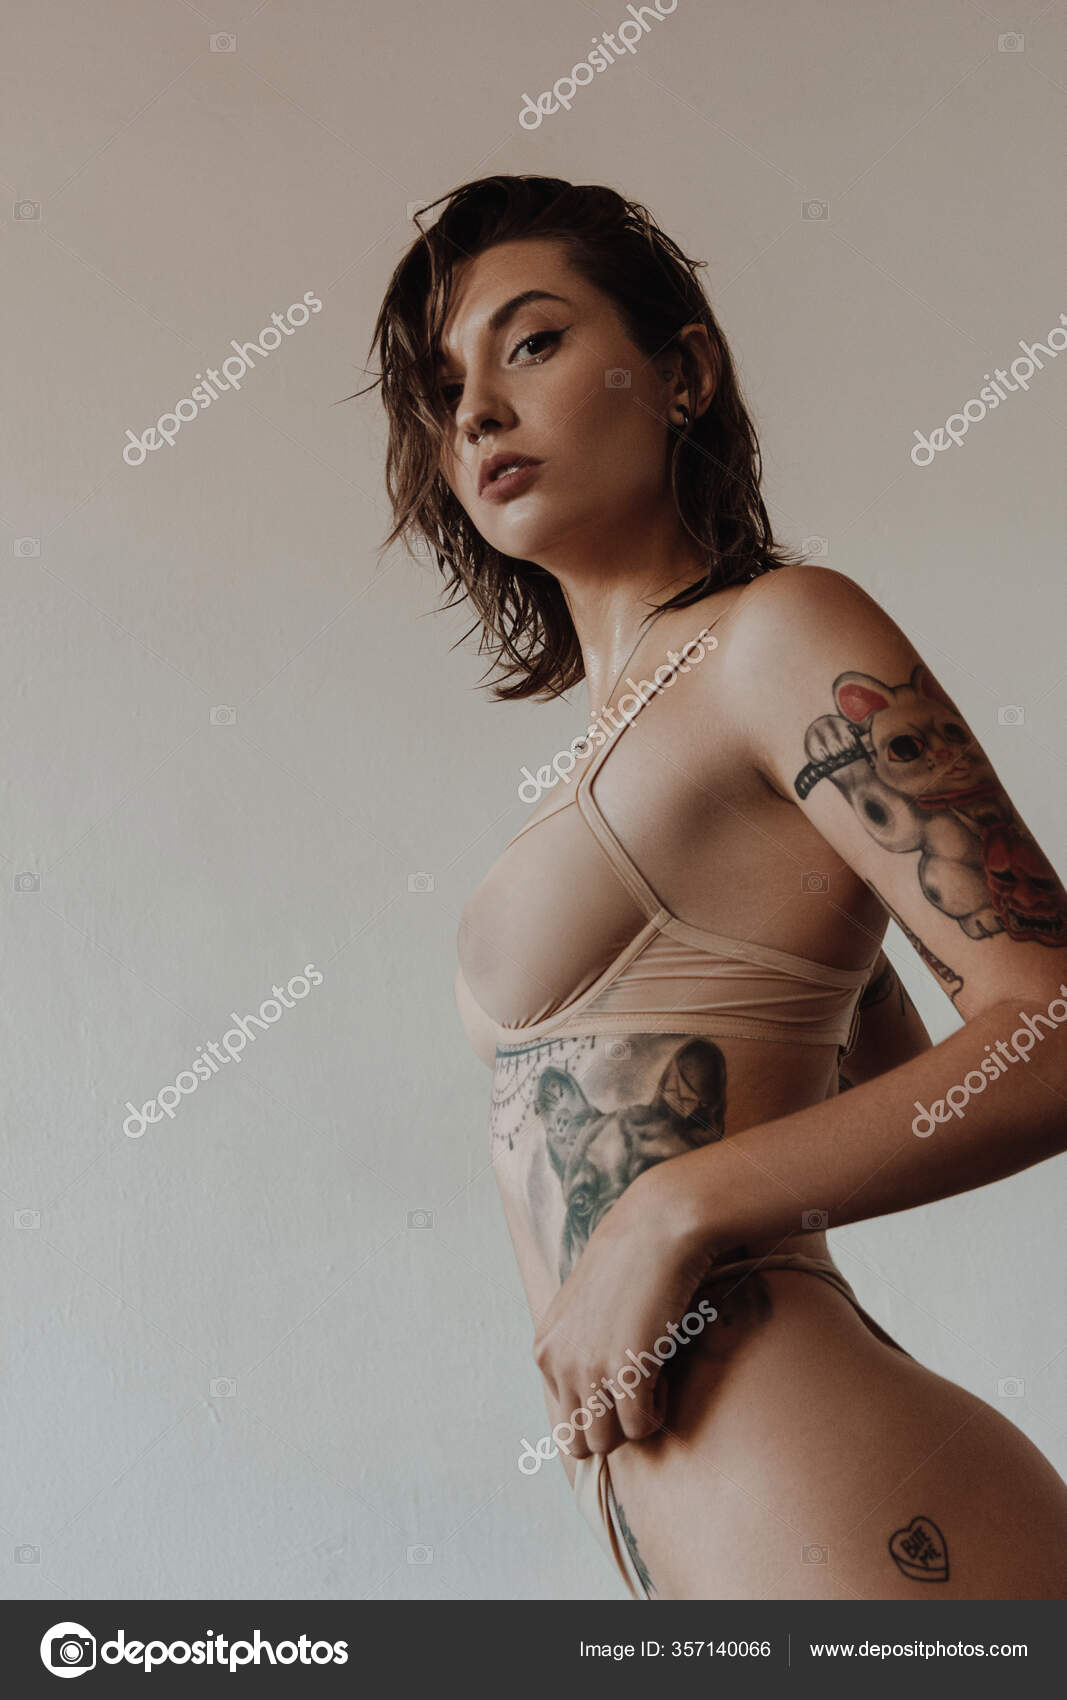 Hot Naked Women With Tattoos